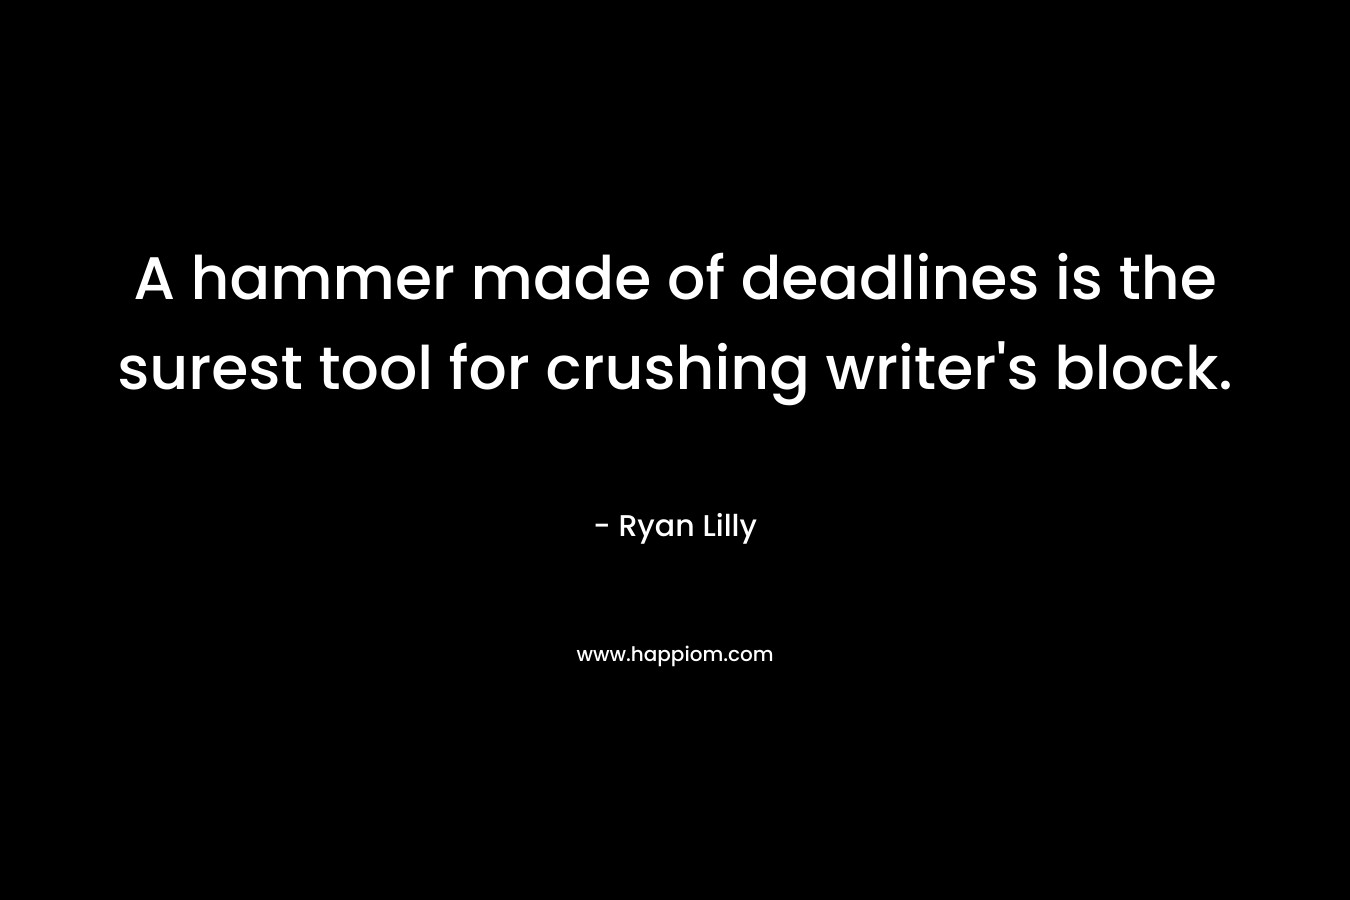 A hammer made of deadlines is the surest tool for crushing writer’s block. – Ryan Lilly